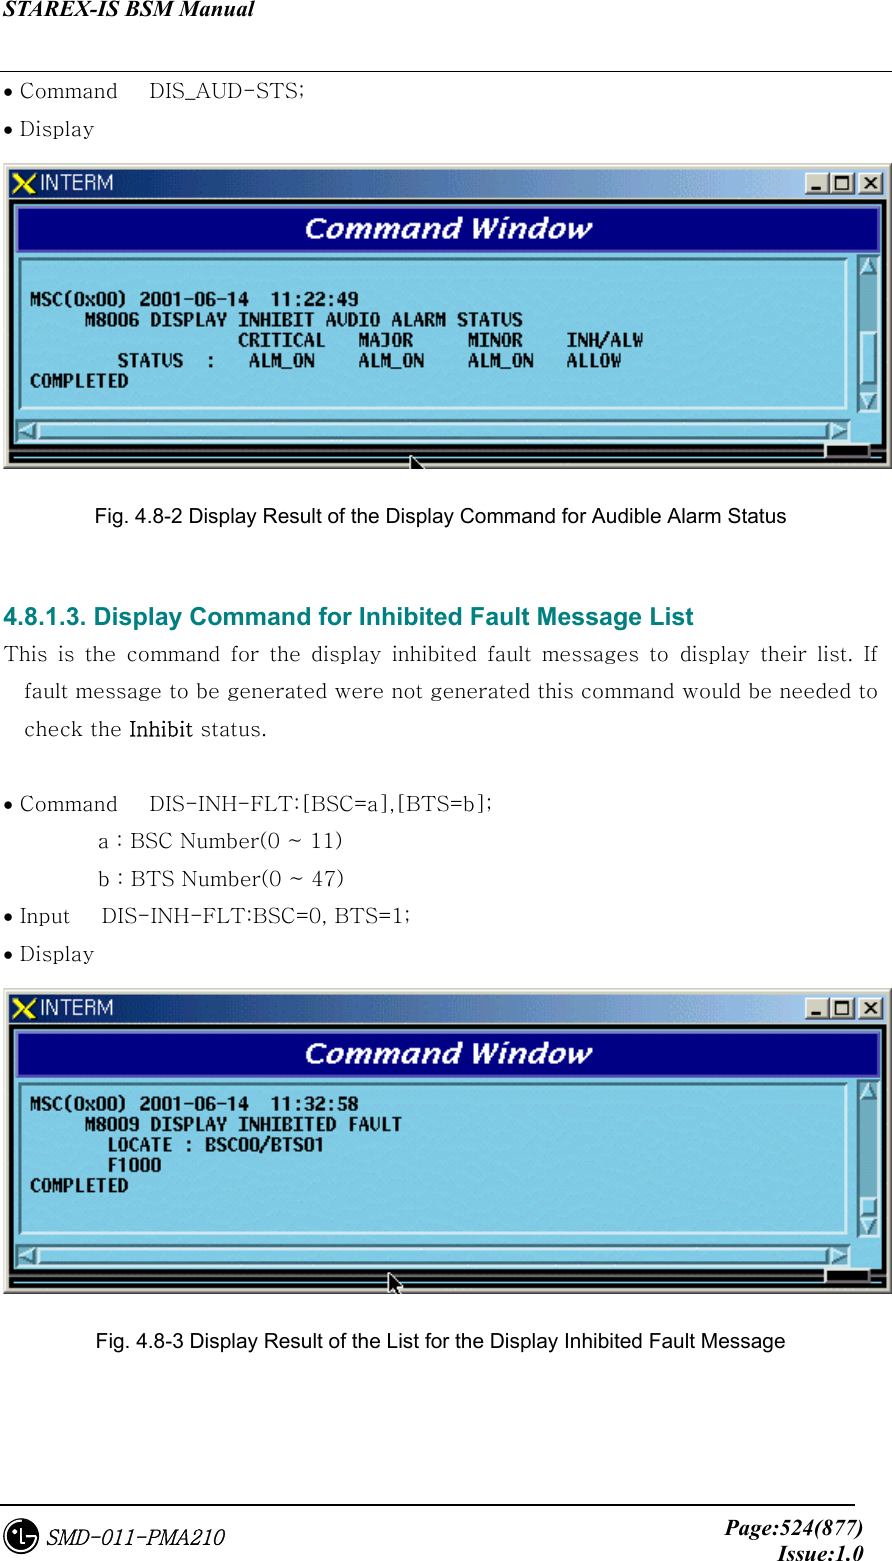 STAREX-IS BSM Manual     Page:524(877)Issue:1.0SMD-011-PMA210 • Command   DIS_AUD-STS; • Display    Fig. 4.8-2 Display Result of the Display Command for Audible Alarm Status  4.8.1.3. Display Command for Inhibited Fault Message List   This is the command for the display inhibited fault messages to display their list. If fault message to be generated were not generated this command would be needed to check the Inhibit status.  • Command   DIS-INH-FLT:[BSC=a],[BTS=b];           a : BSC Number(0 ~ 11)          b : BTS Number(0 ~ 47) • Input   DIS-INH-FLT:BSC=0, BTS=1; • Display    Fig. 4.8-3 Display Result of the List for the Display Inhibited Fault Message  